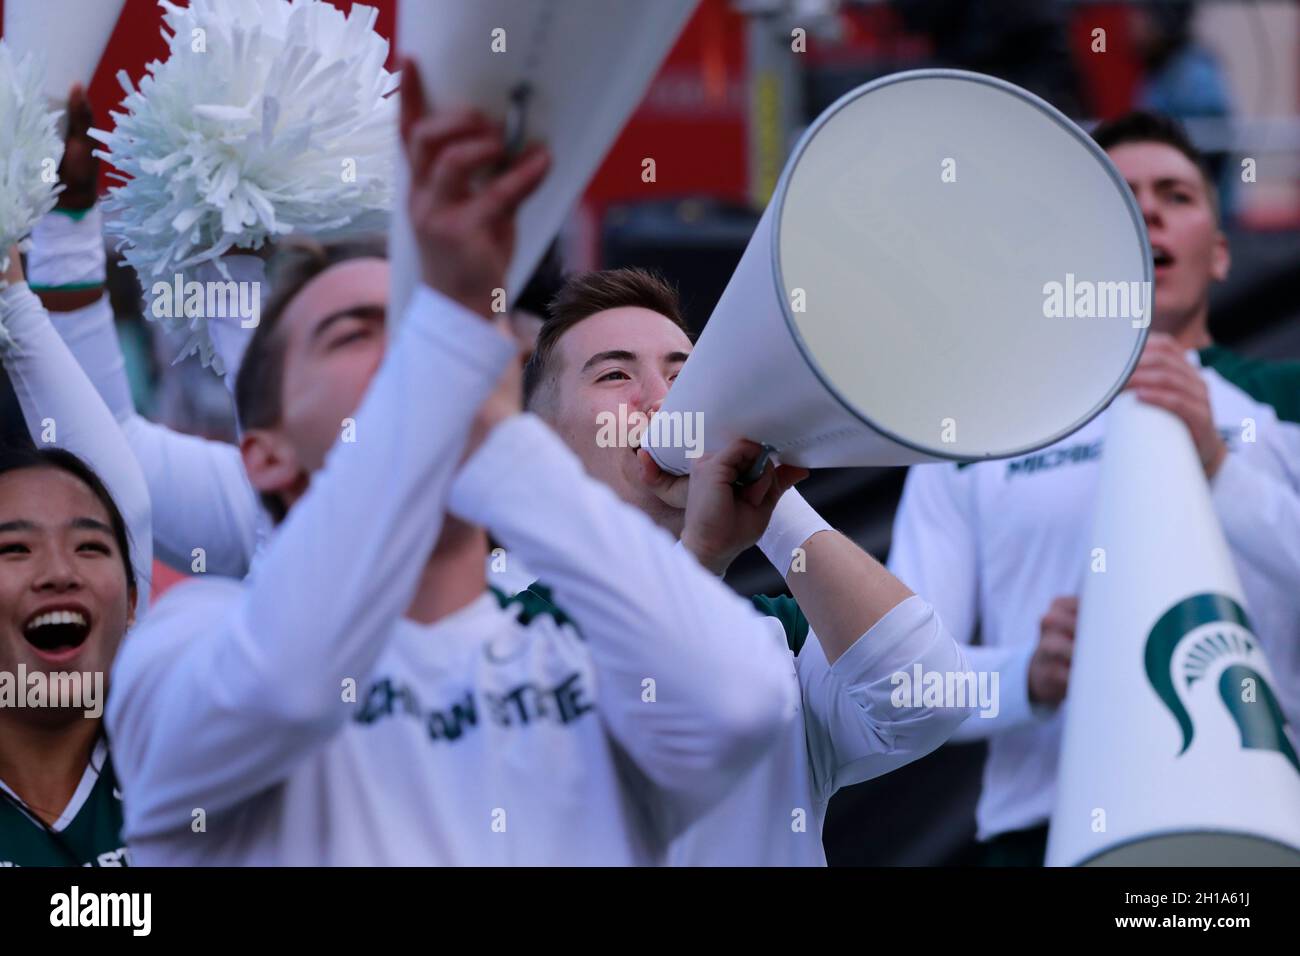 BLOOMINGTON, UNITED STATES - 2021/10/16: Michigan State cheerleaders cheer for the Spartans during an NCAA game against Indiana University on October 16, 2021 at Memorial Stadium in Bloomington, Ind. IU lost to Michigan State 20-15. Stock Photo